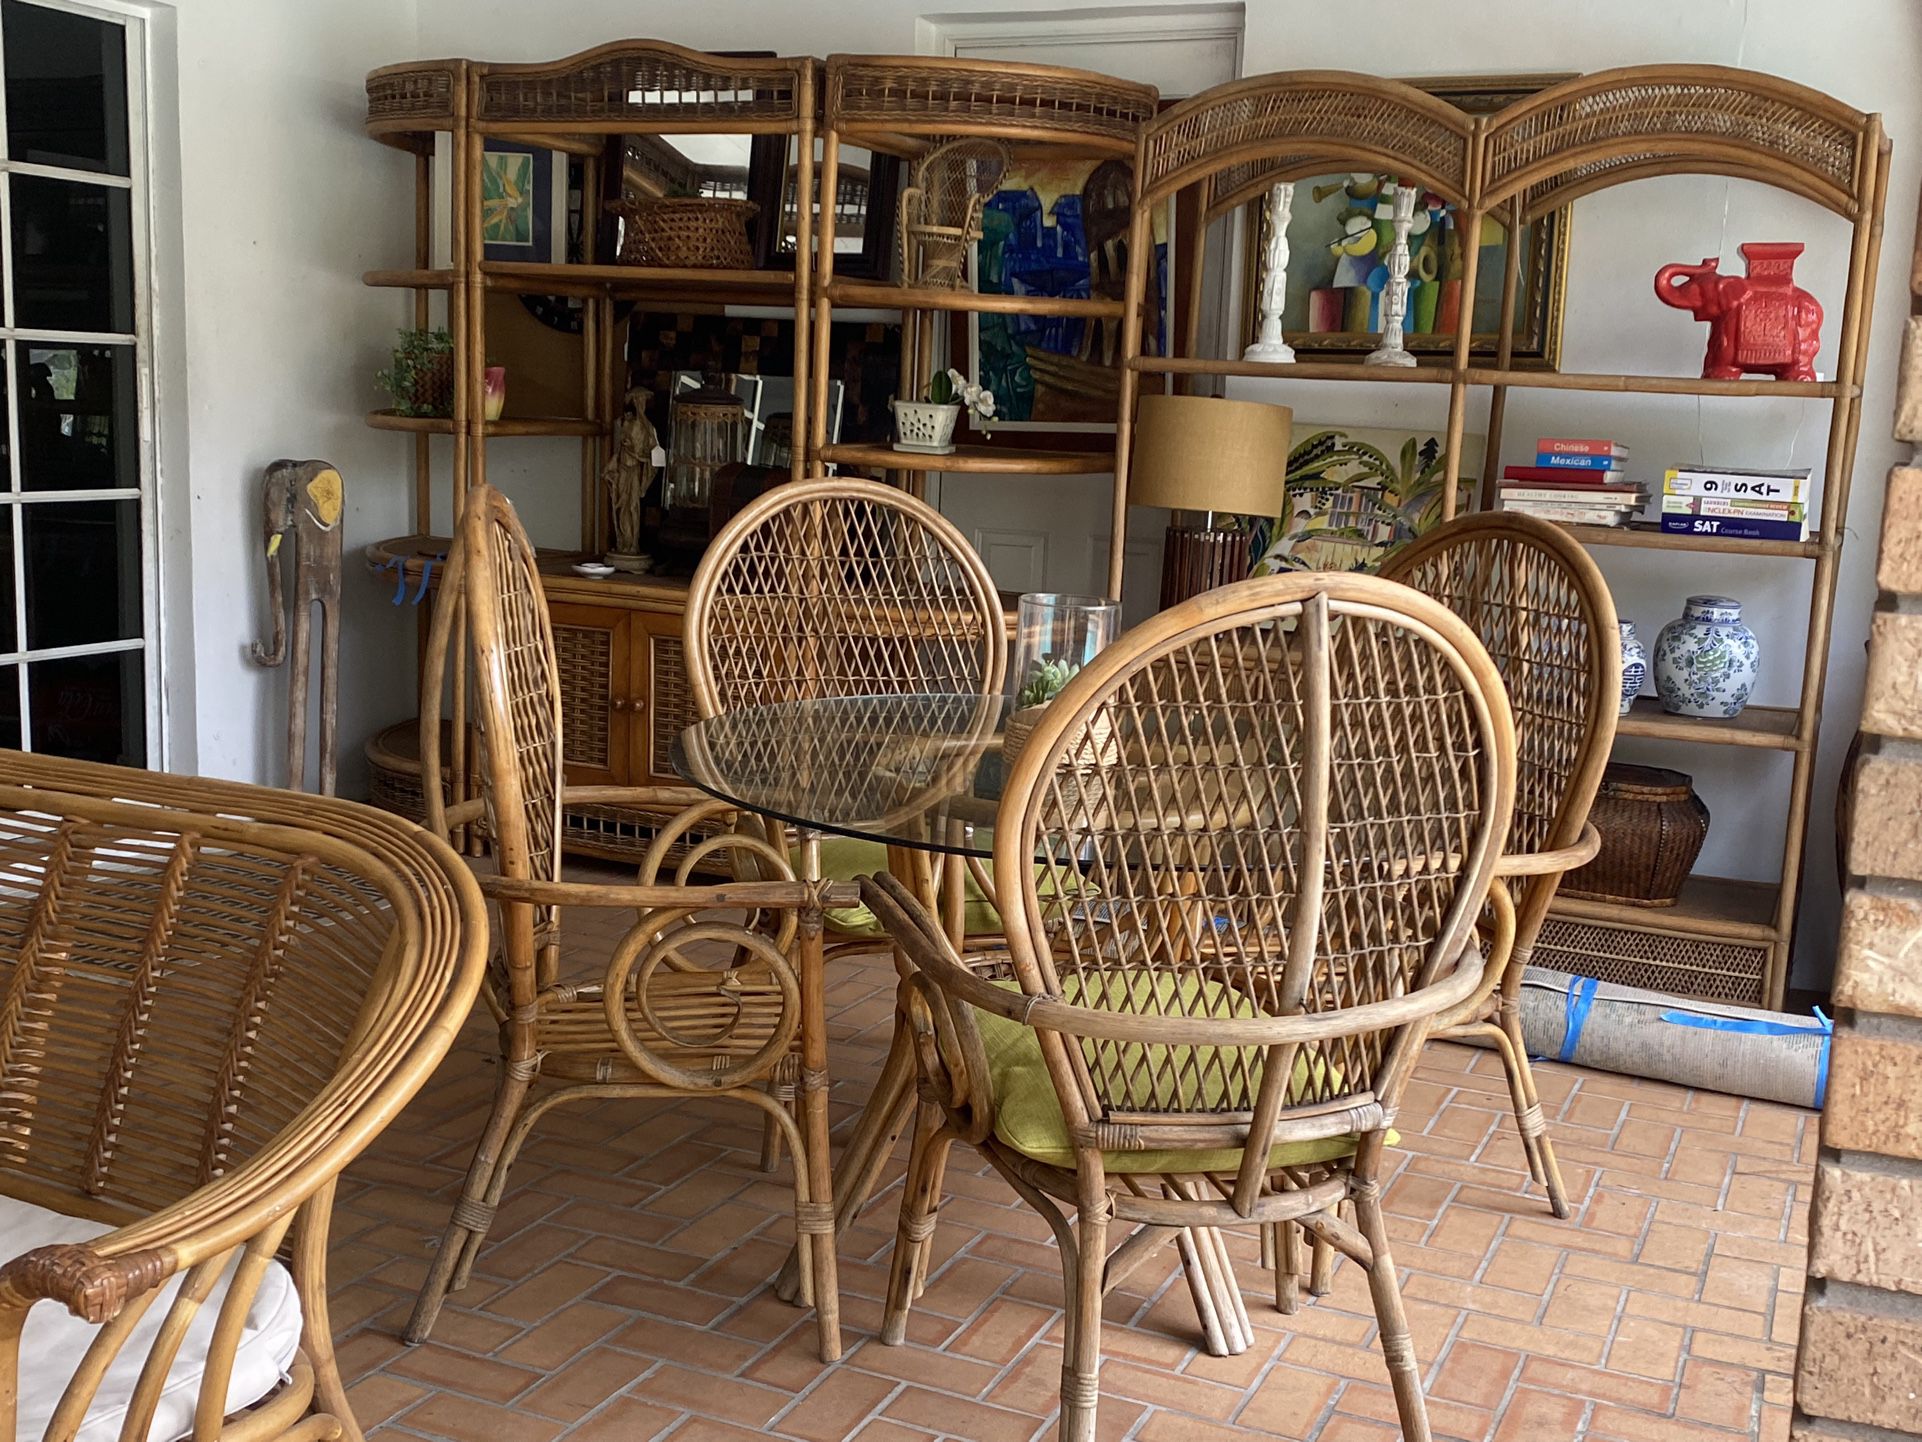 Great Rare Rattan/Wicker Dining Table W 4 Peacok Style Armchairs 